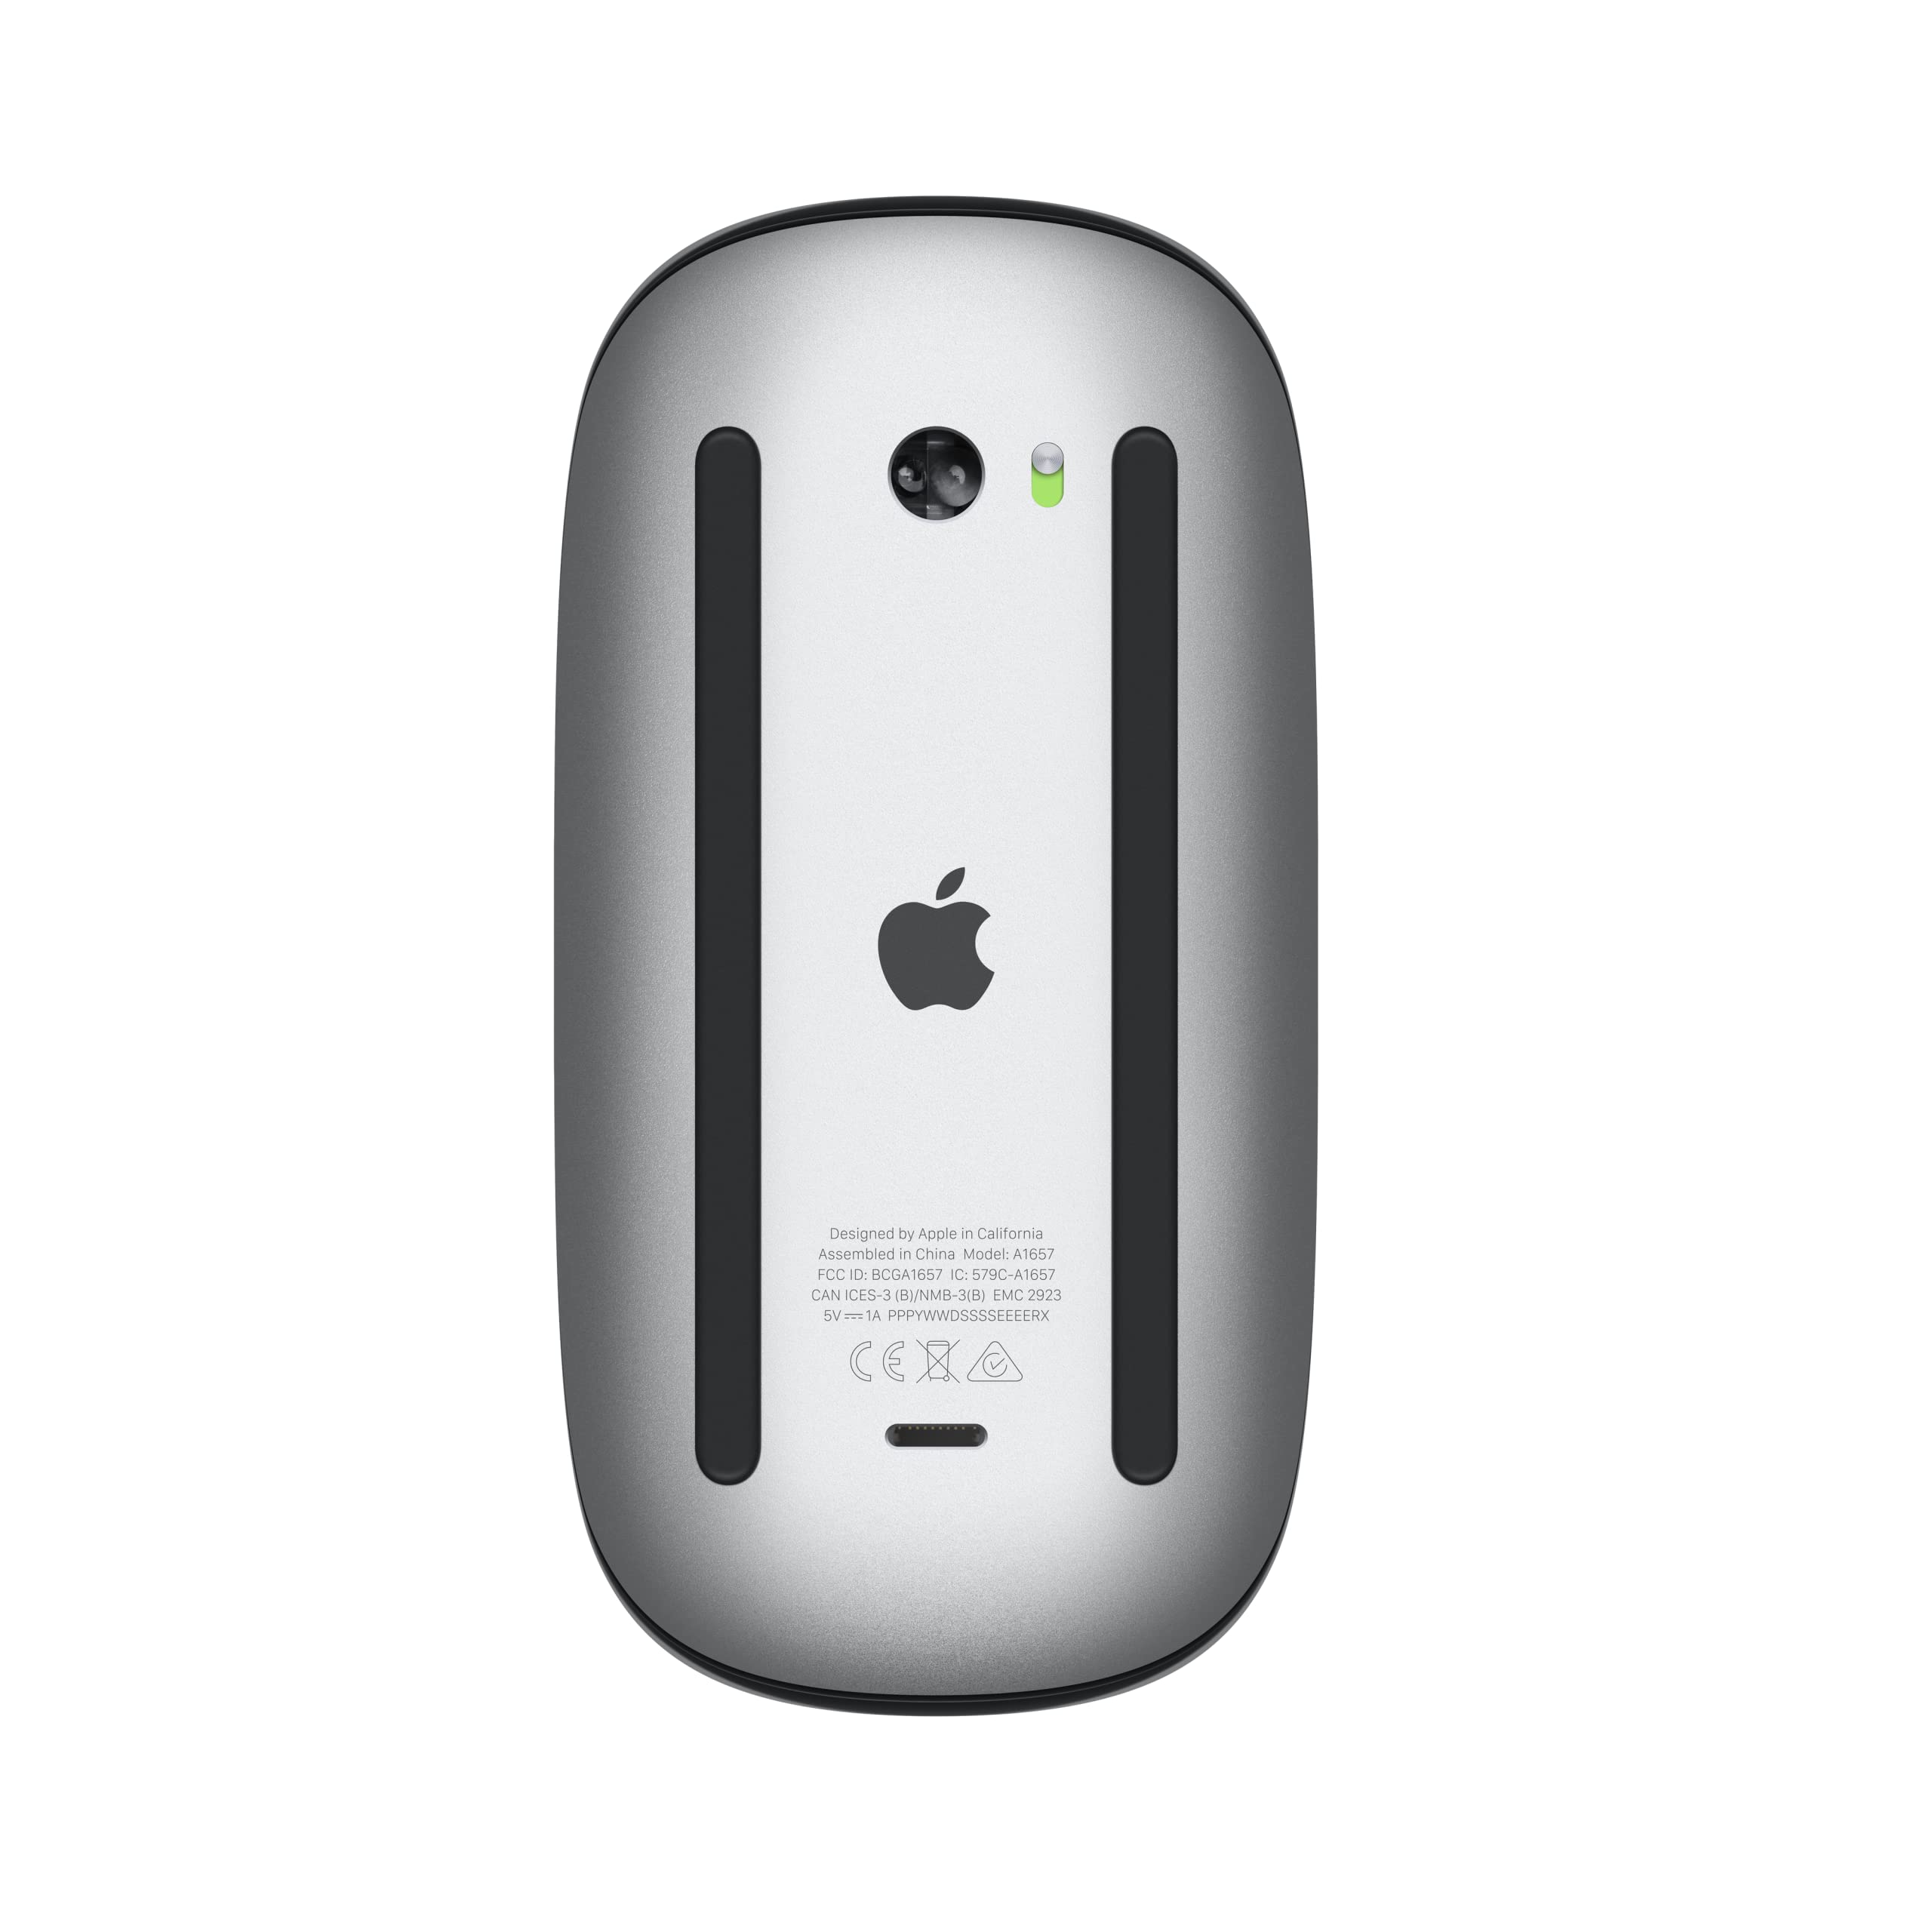 Apple Magic Mouse: Wireless, Bluetooth, Rechargeable. Works with Mac or iPad; Black, Multi-Touch Surface